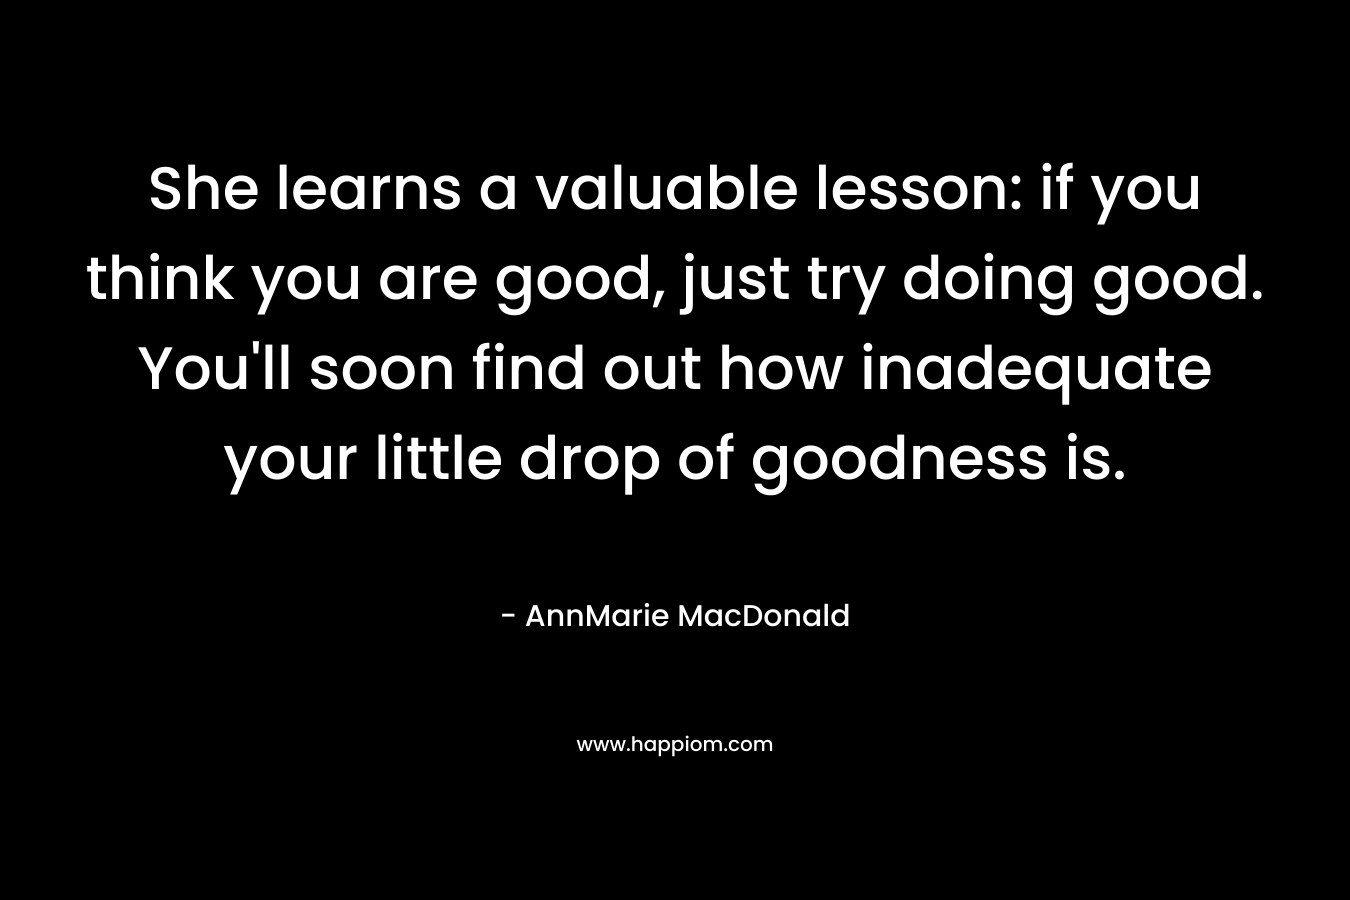 She learns a valuable lesson: if you think you are good, just try doing good. You’ll soon find out how inadequate your little drop of goodness is. – AnnMarie MacDonald